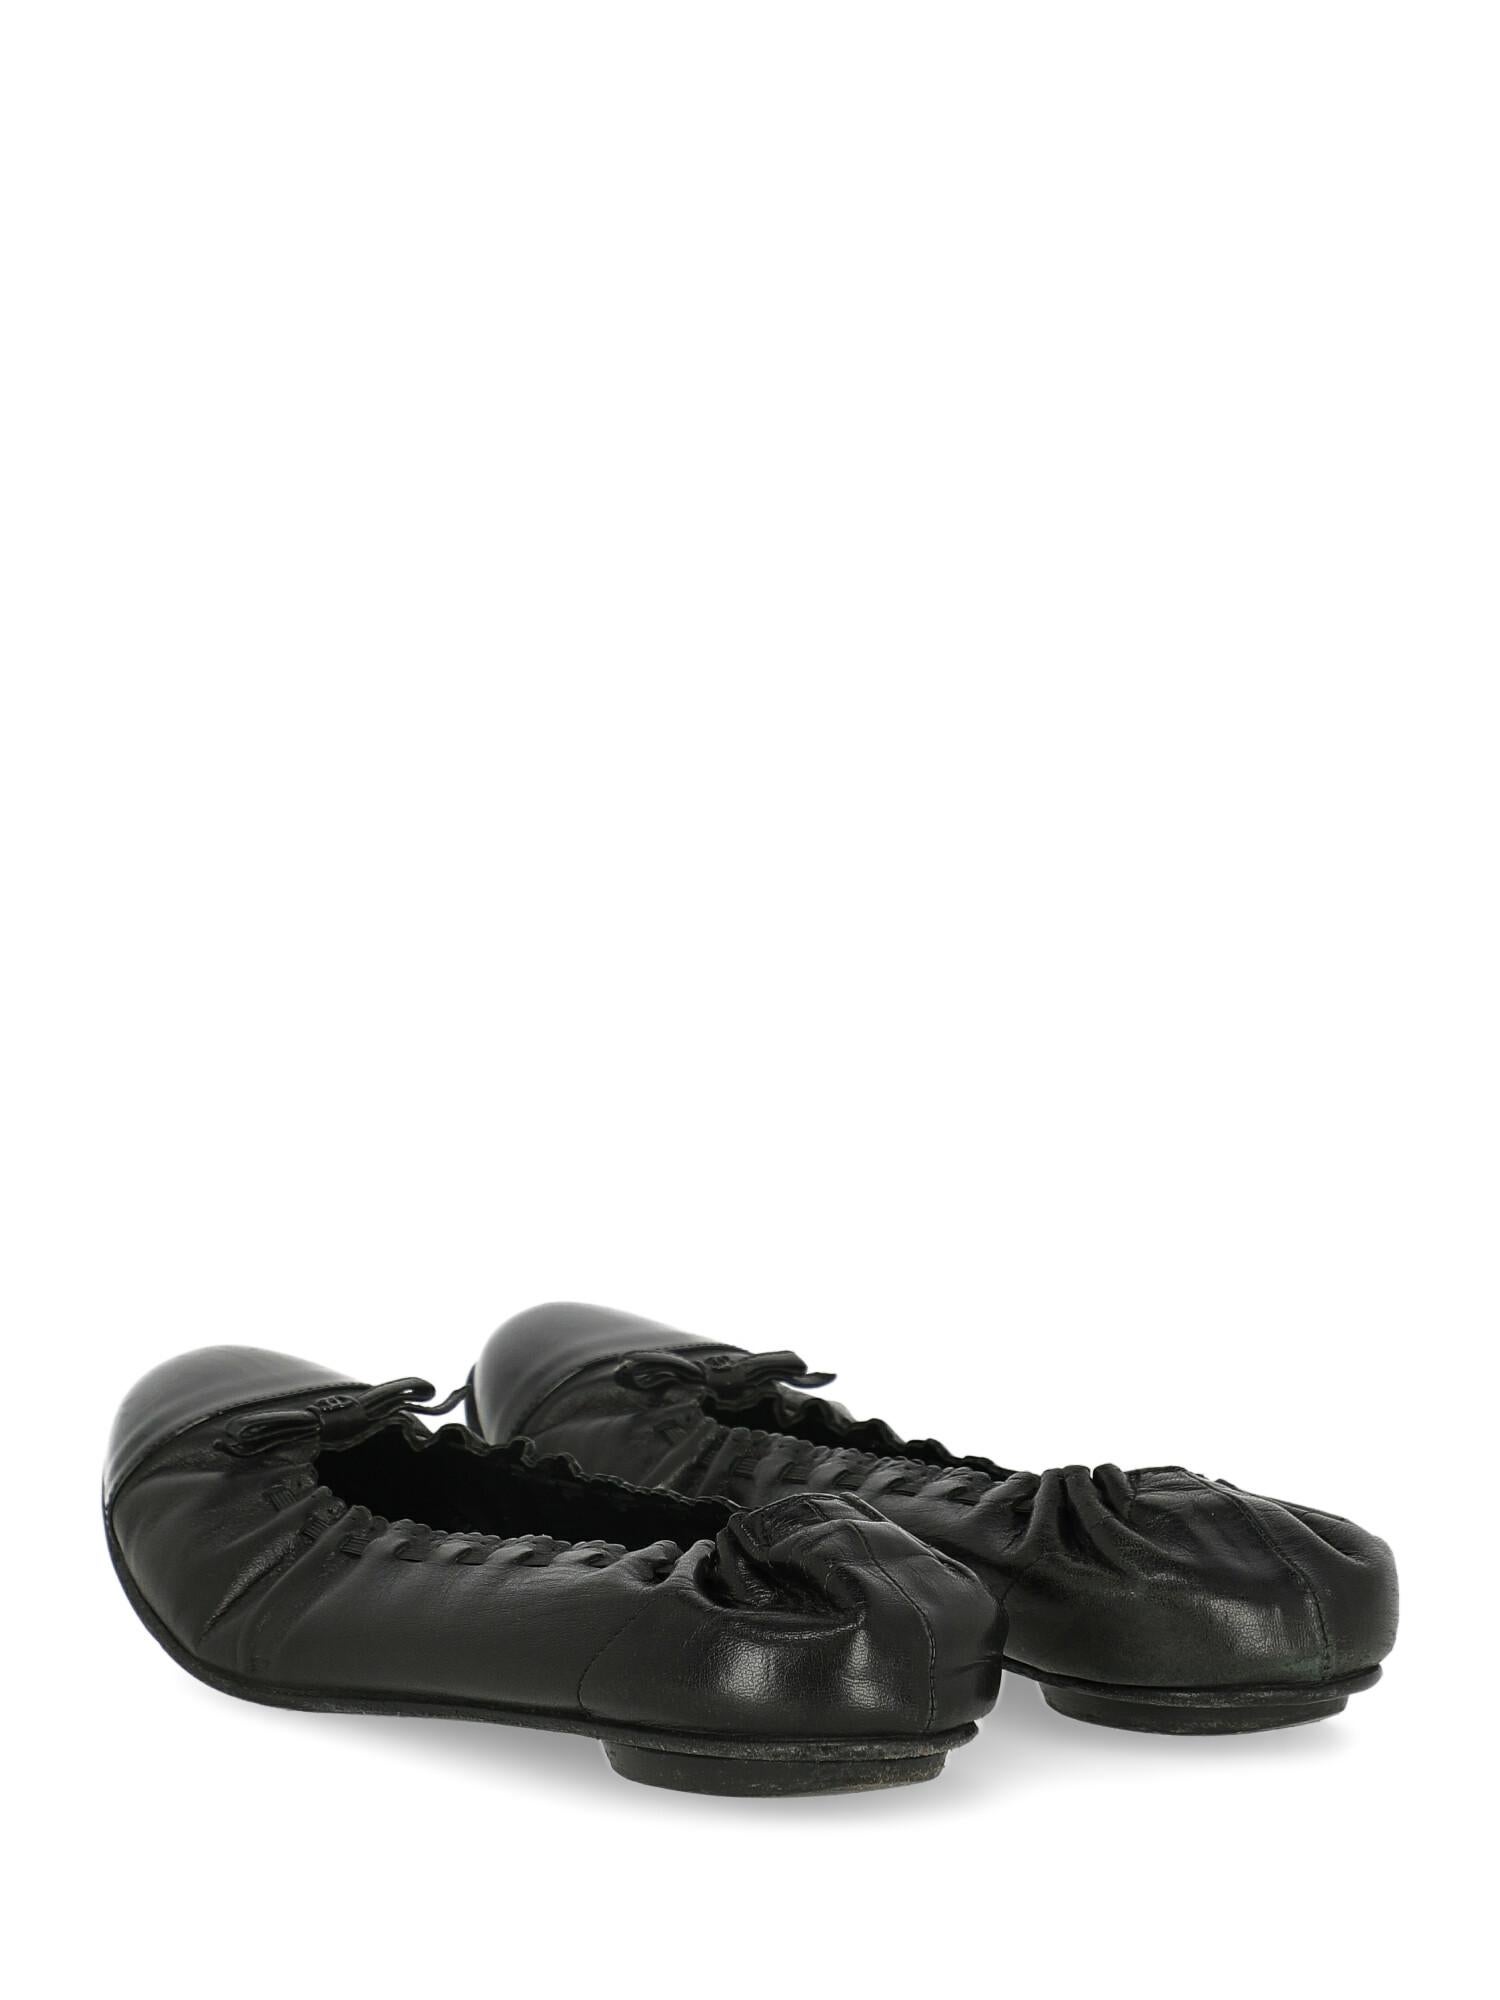 Chanel Women Ballet flats Black Leather EU 38 In Fair Condition For Sale In Milan, IT